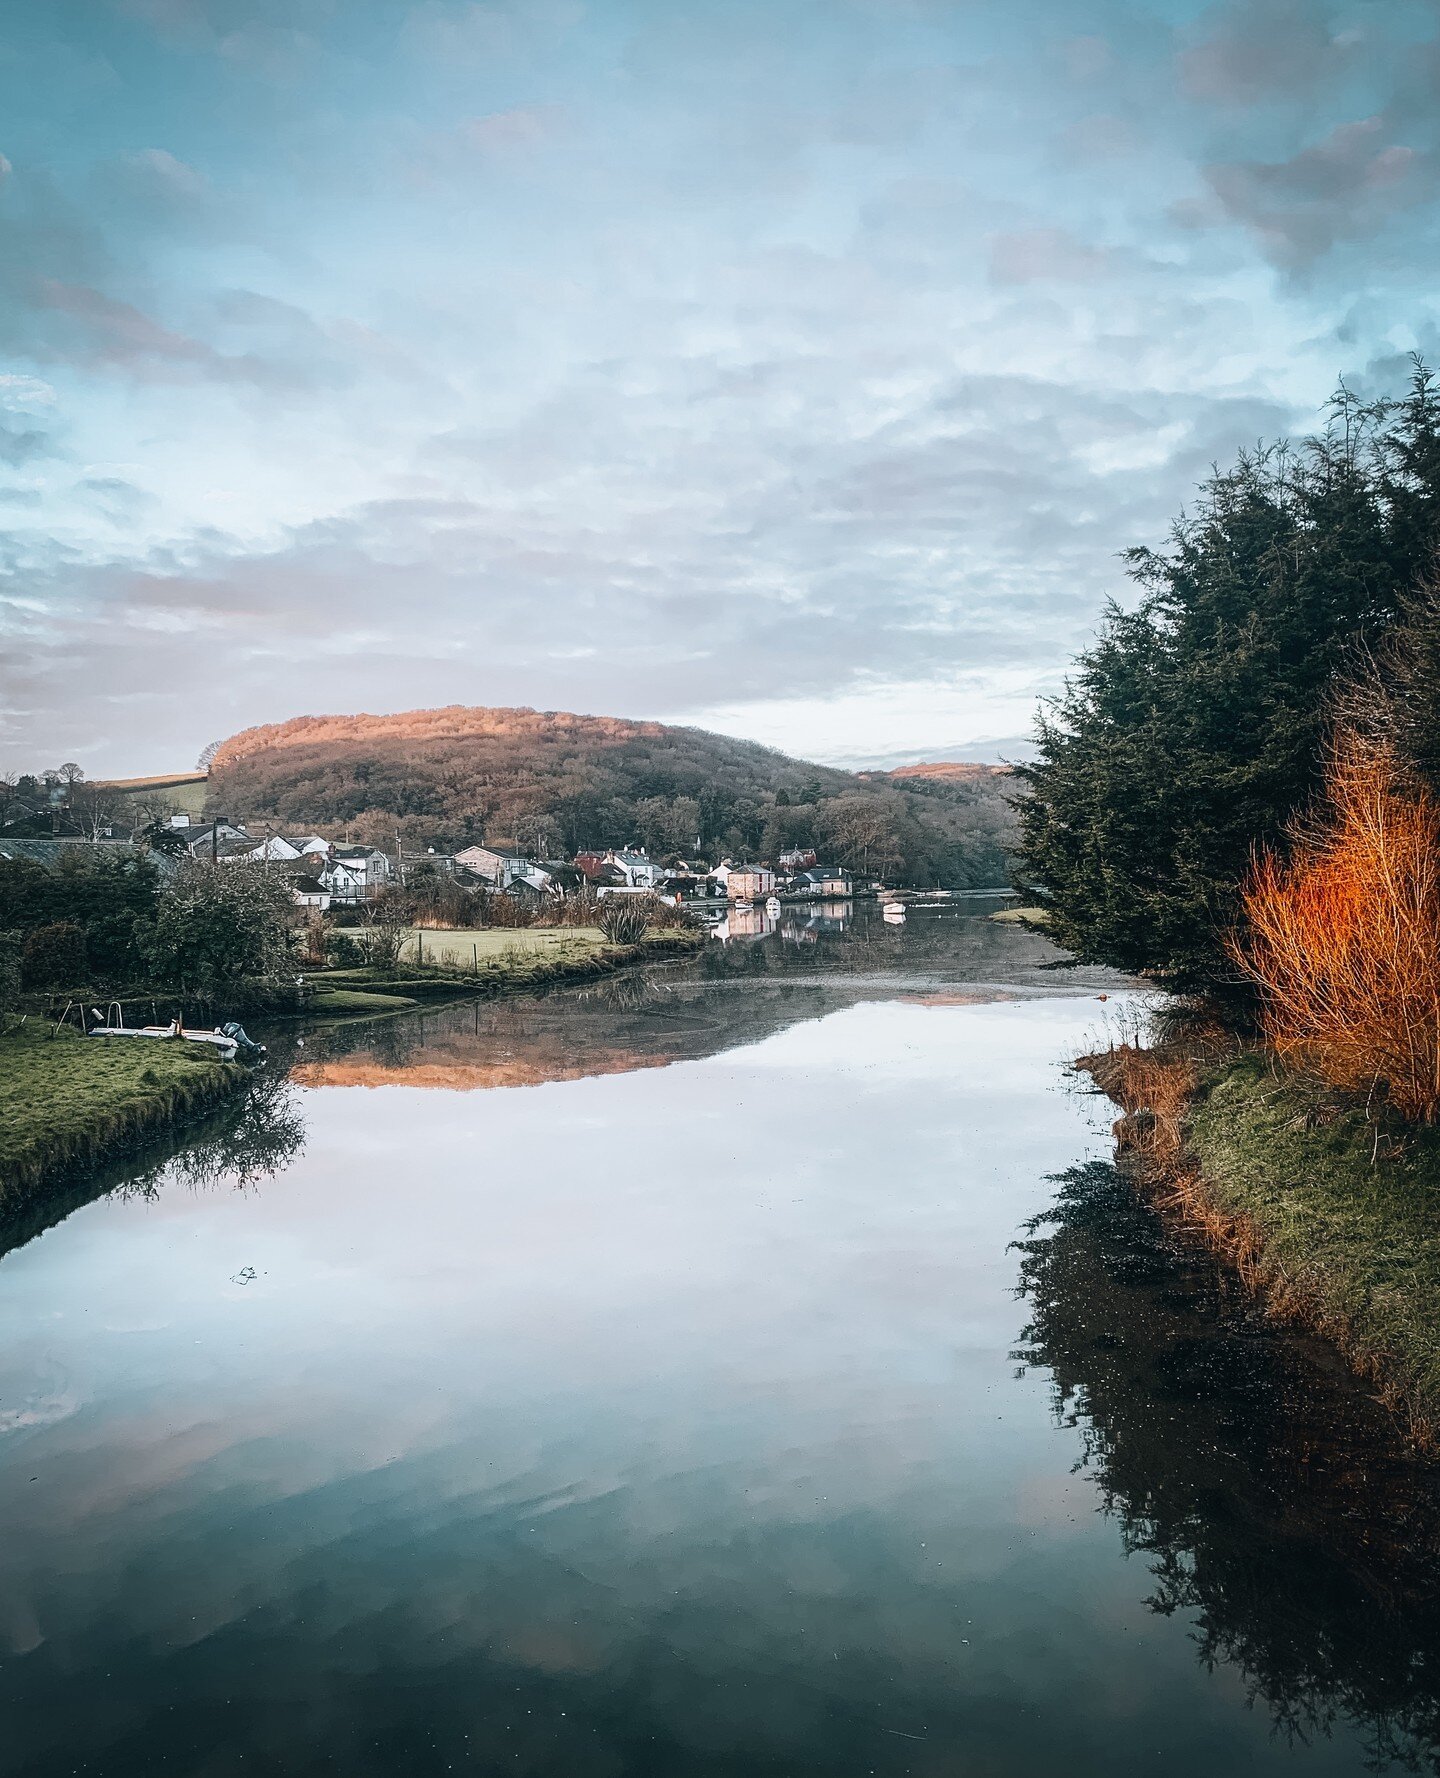 Looking to get out this weekend? Check out Lerryn - our local village ⁠
⁠
Be sure to seek the warmth of open fires at the @theshipinn for a Lantic Gin &amp; Tonic and @lerrynriverstores for a something delectable after finishing one of the many great